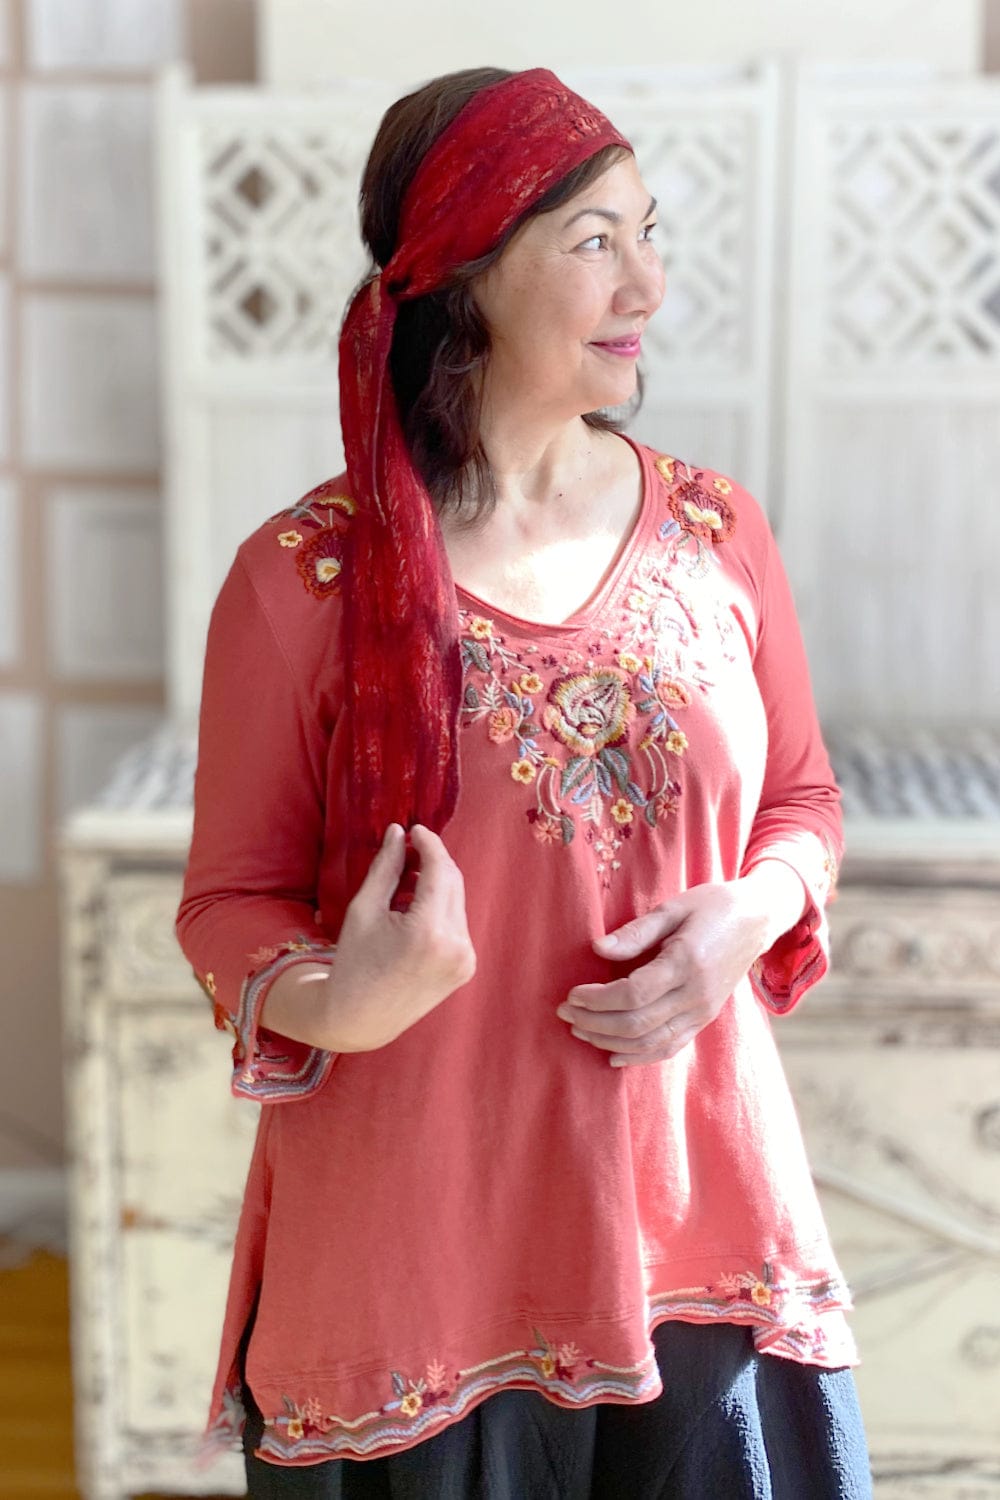 Red Sari headscarf wrapped around the hair of a casually dressed woman.